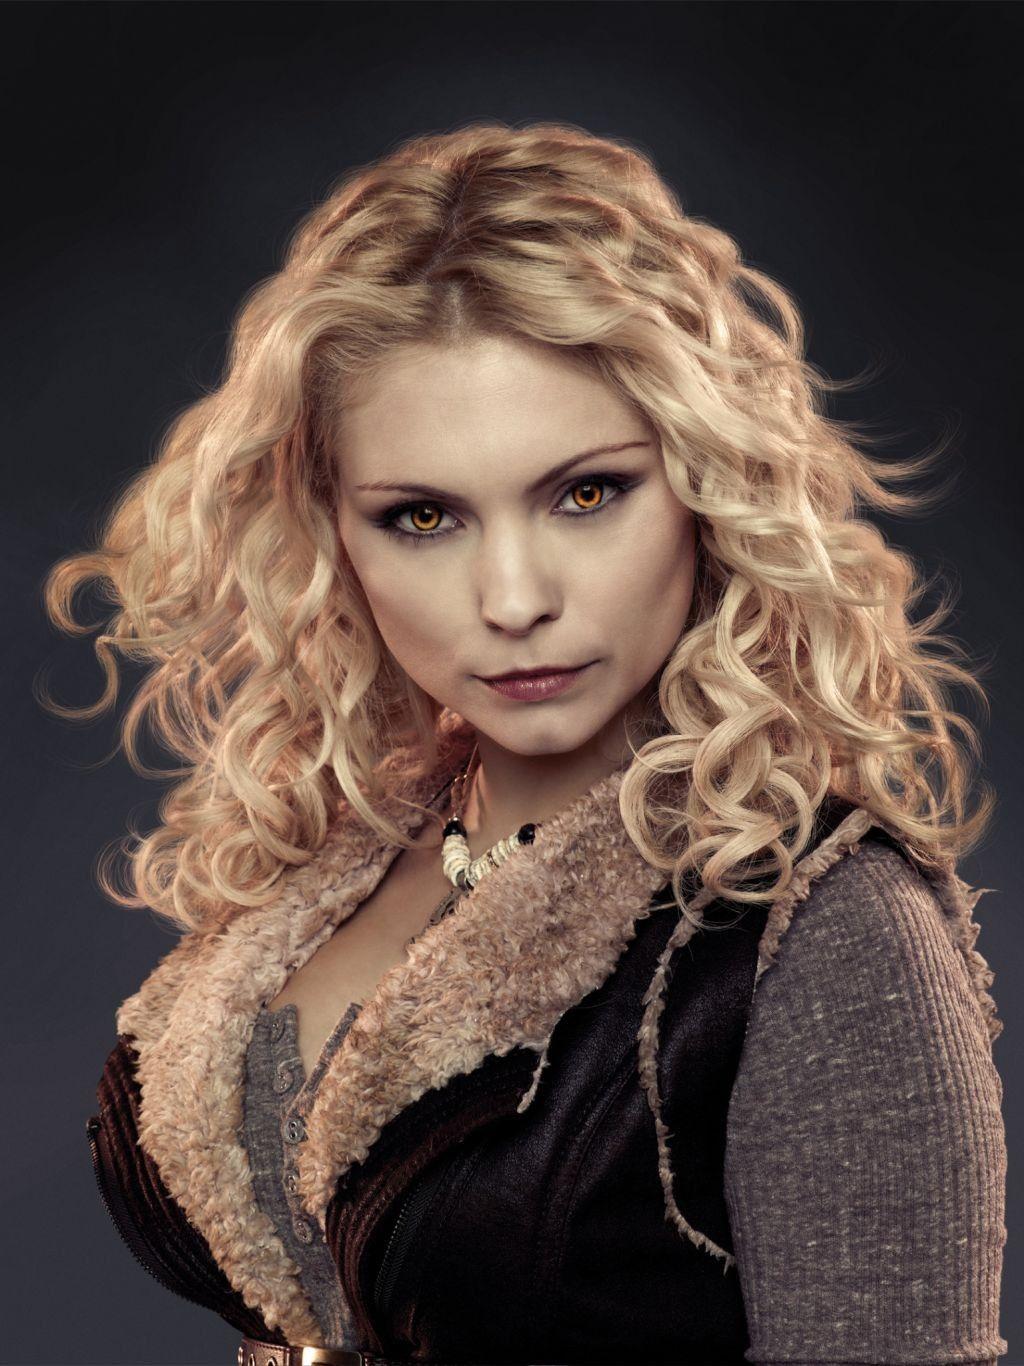 MyAnna Buring as Tanya in Twilight: Breaking Dawn love these